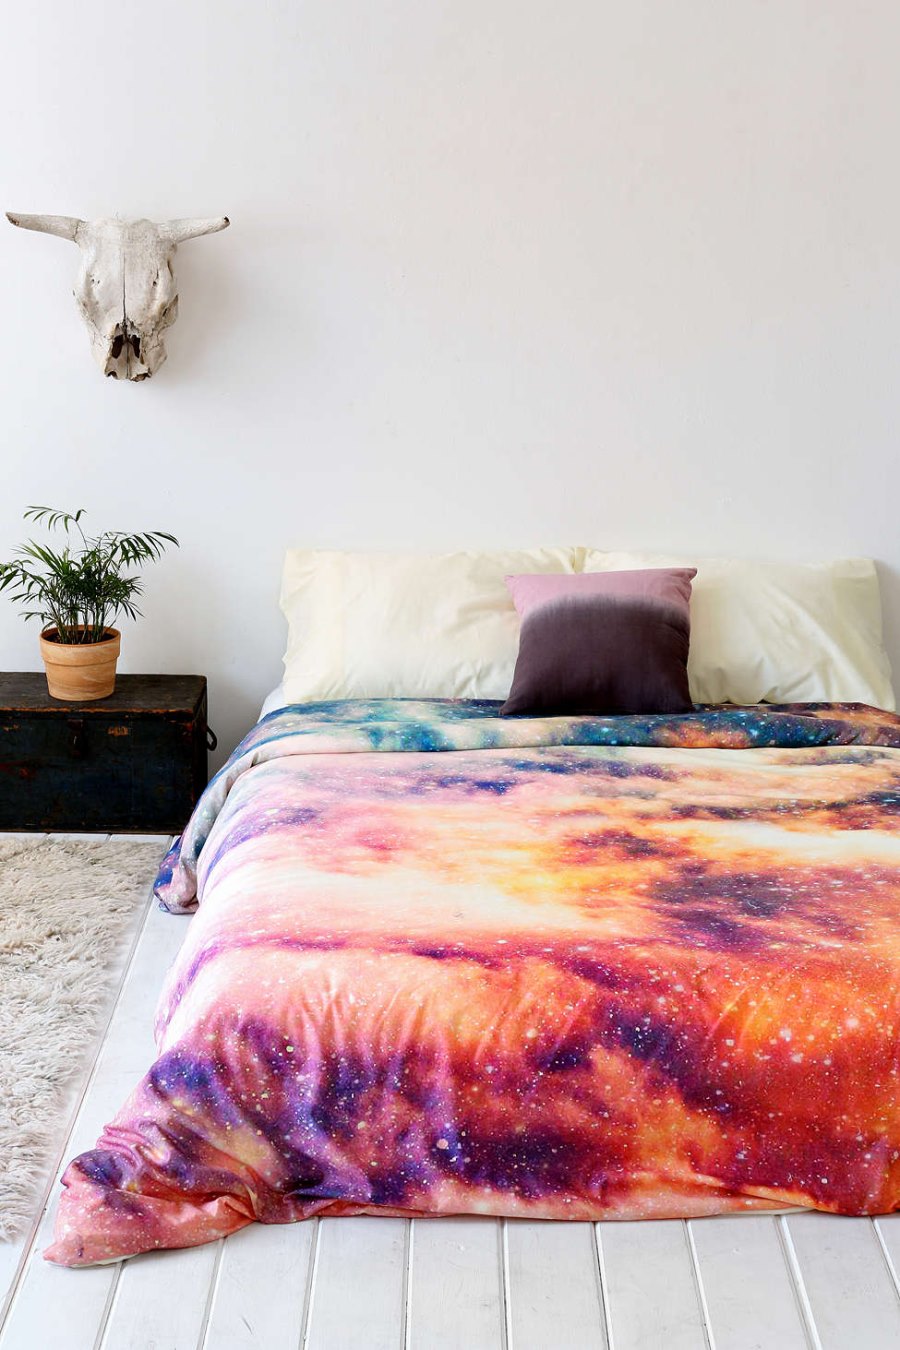 Cosmic duvet cover from Urban Outfitters